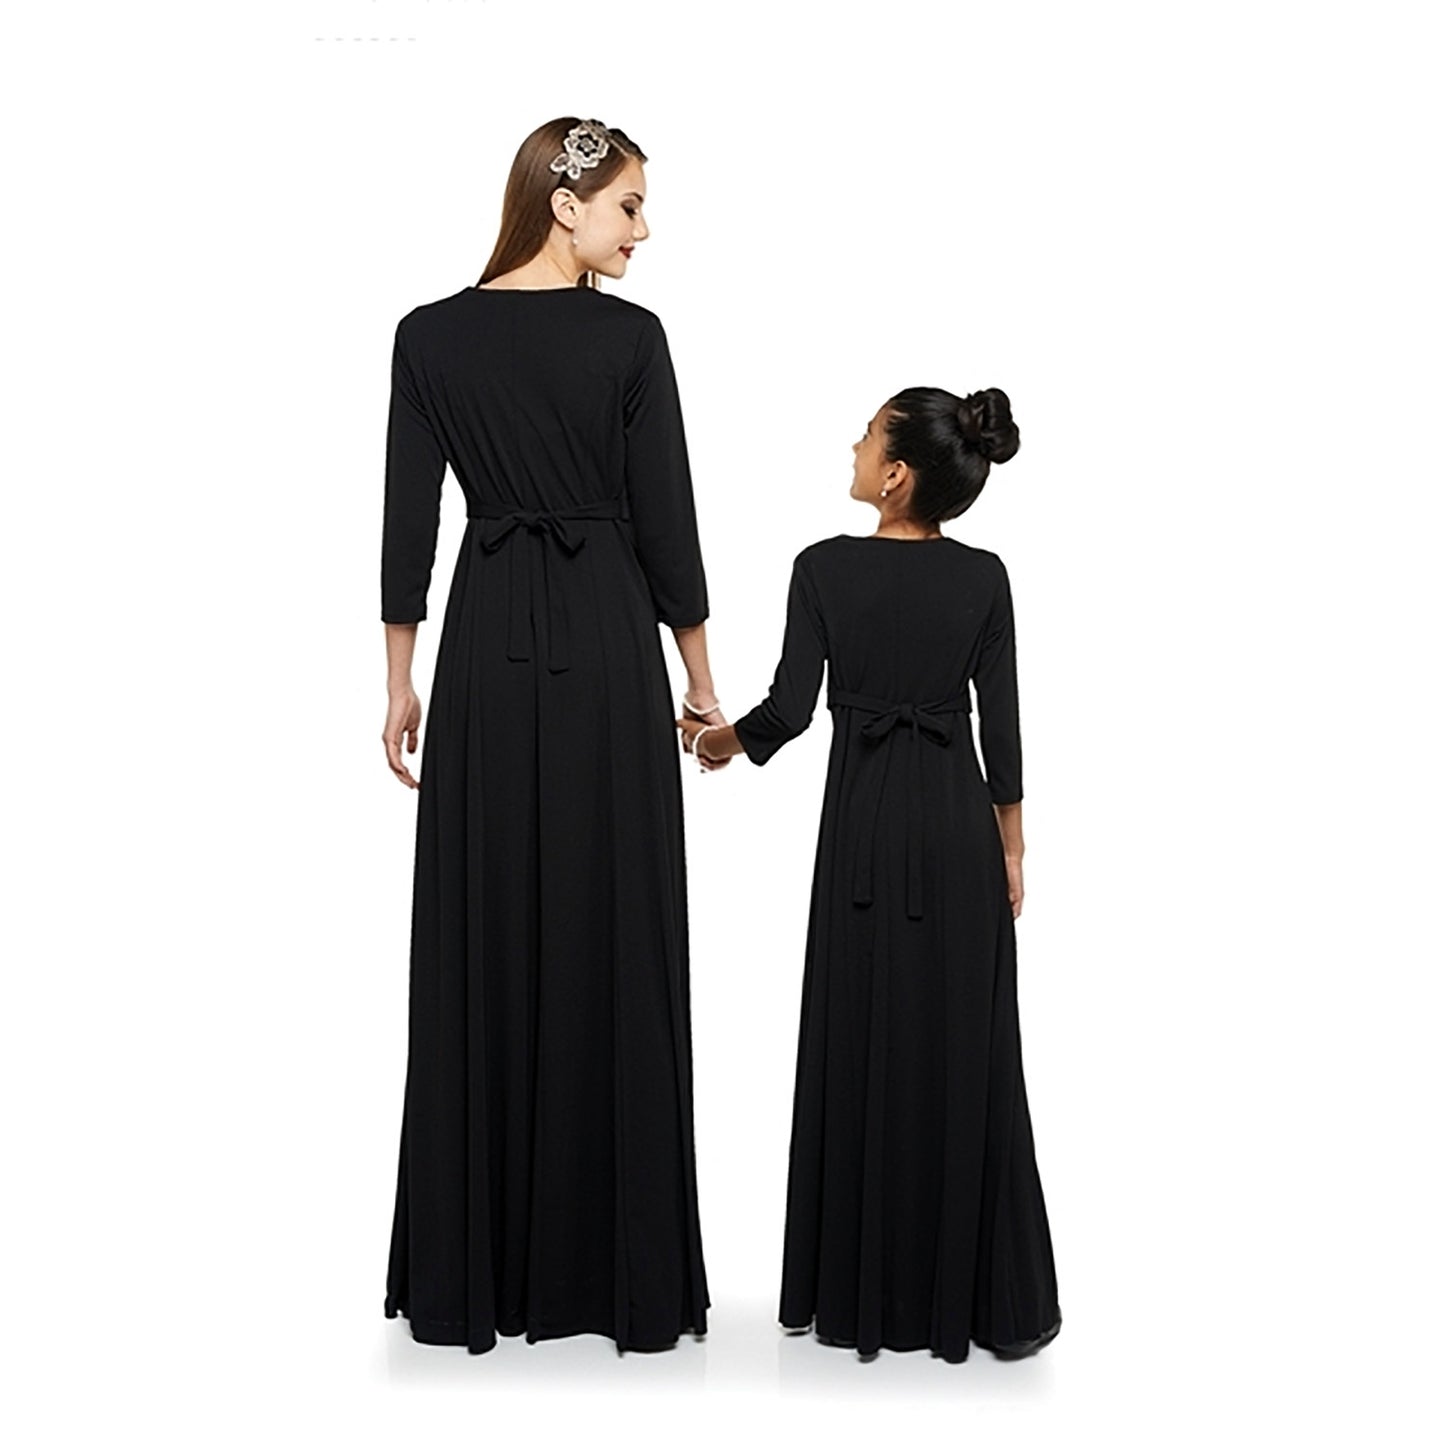 Charlotte Dress - Heart Shaped Neck Floor Length (Adult and Youth)